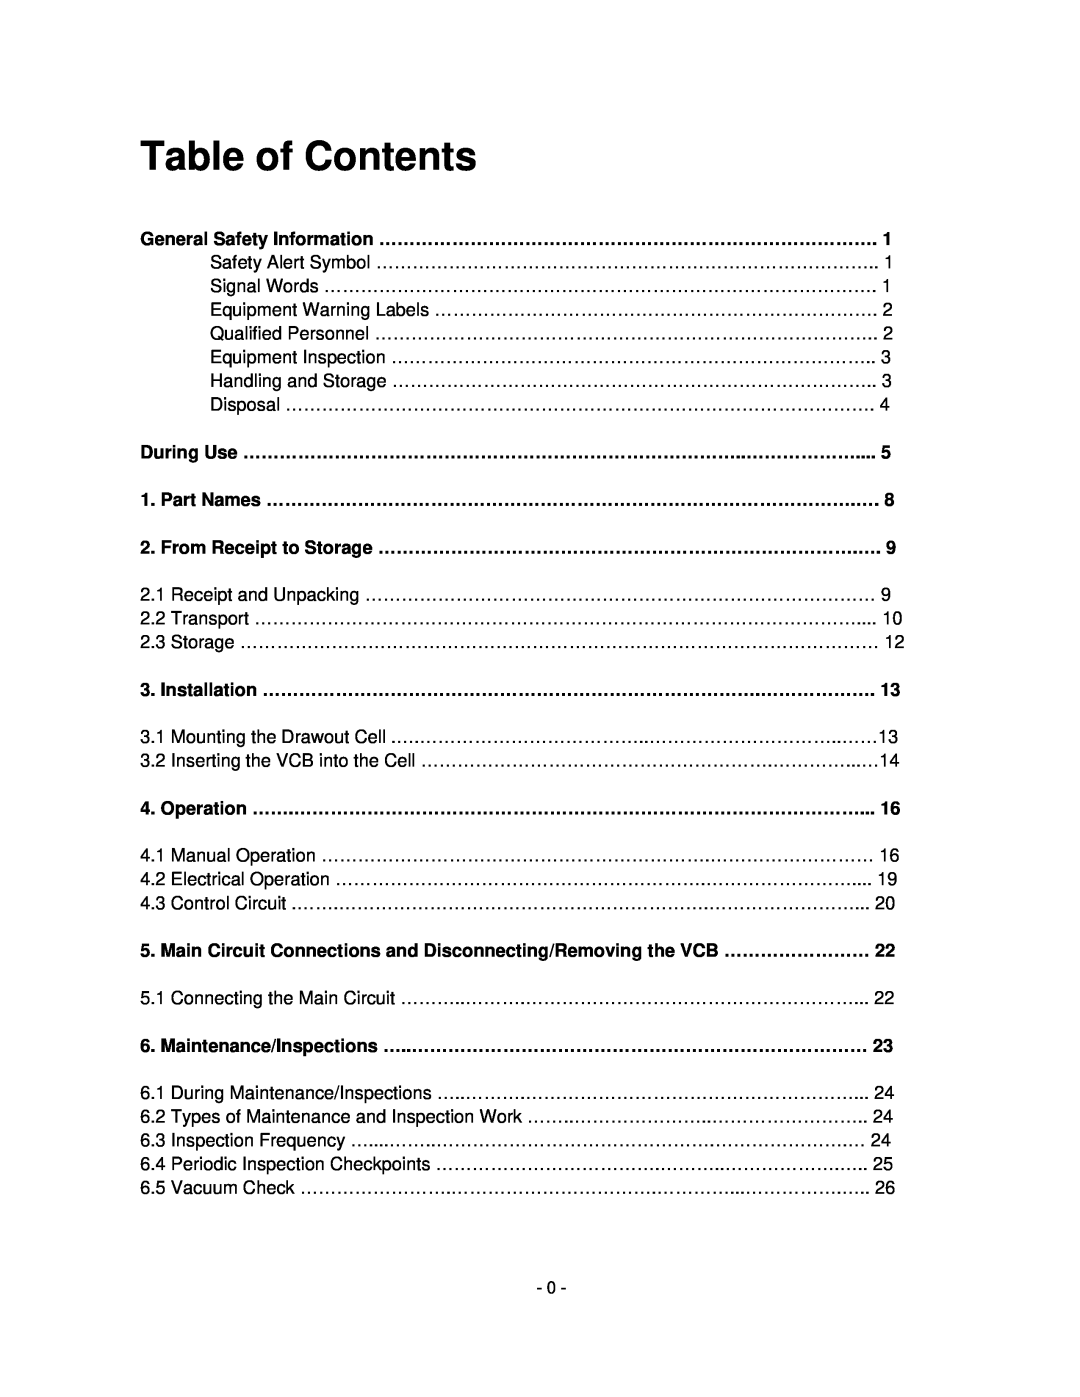 Toshiba HV6CS-MLD, H6A-HLS operation manual Table of Contents, General Safety Information ……………………………………………………………………… 